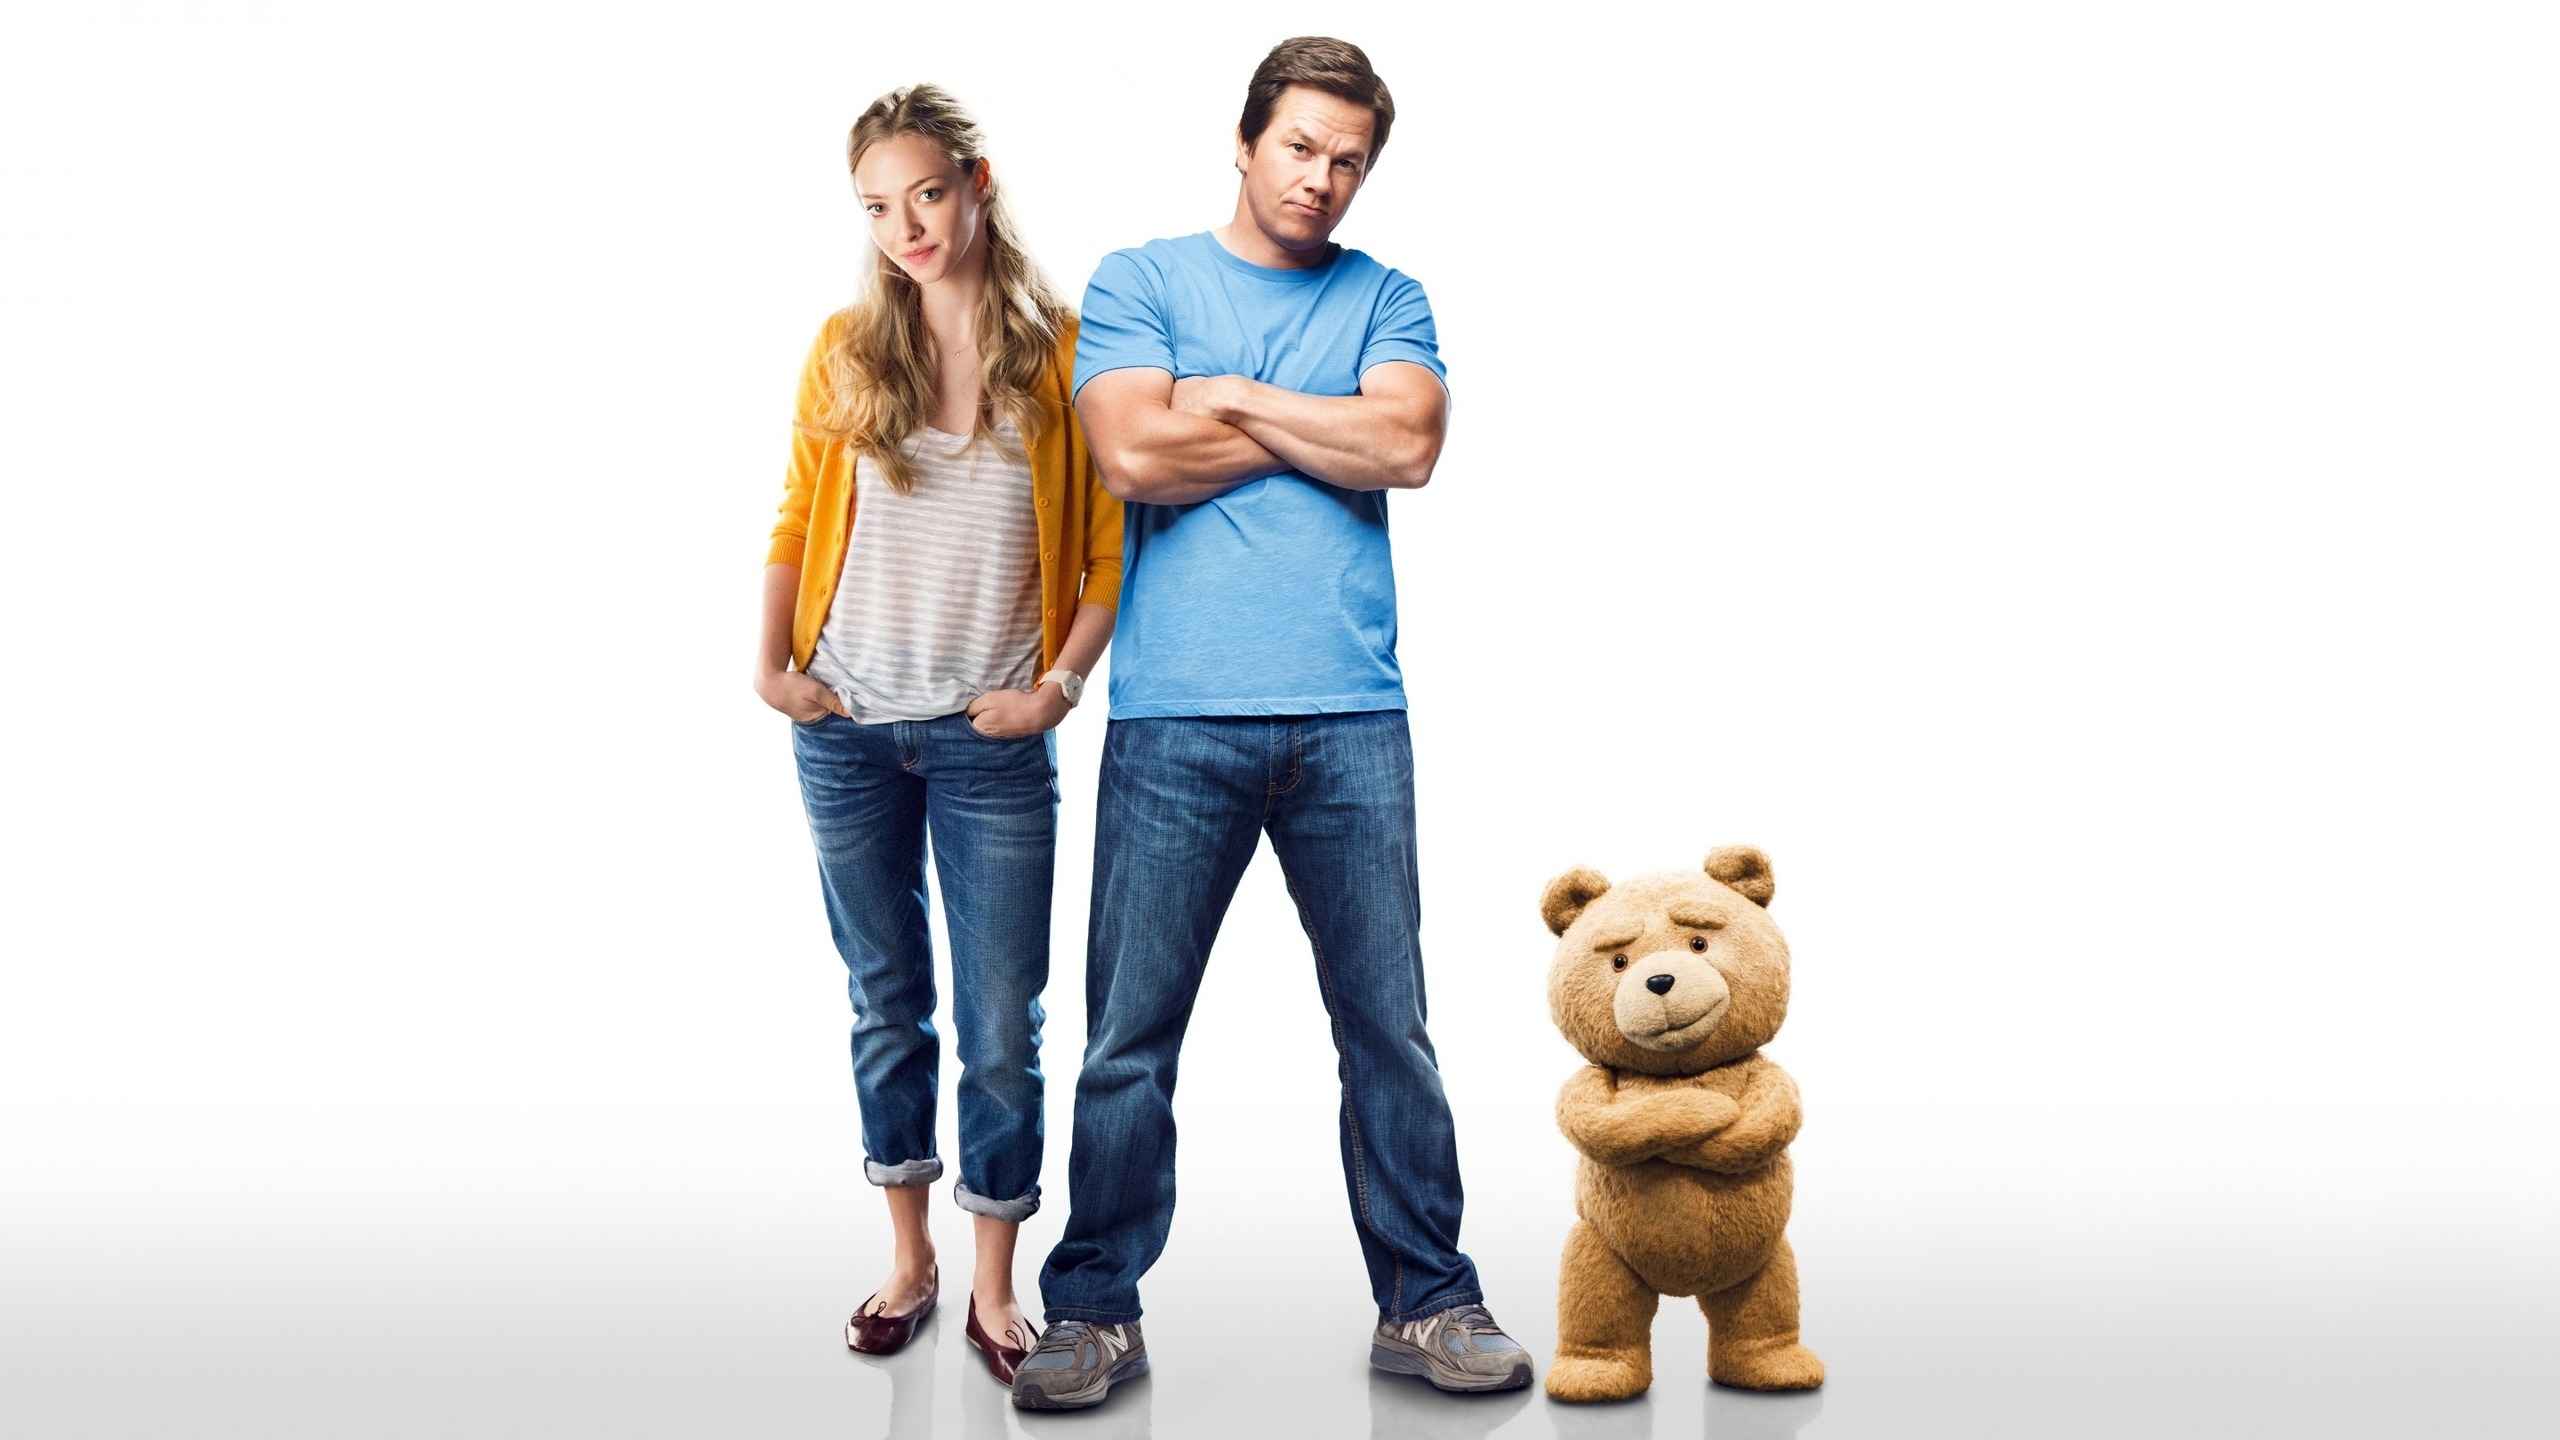 Ted 2 for 2560x1440 HDTV resolution